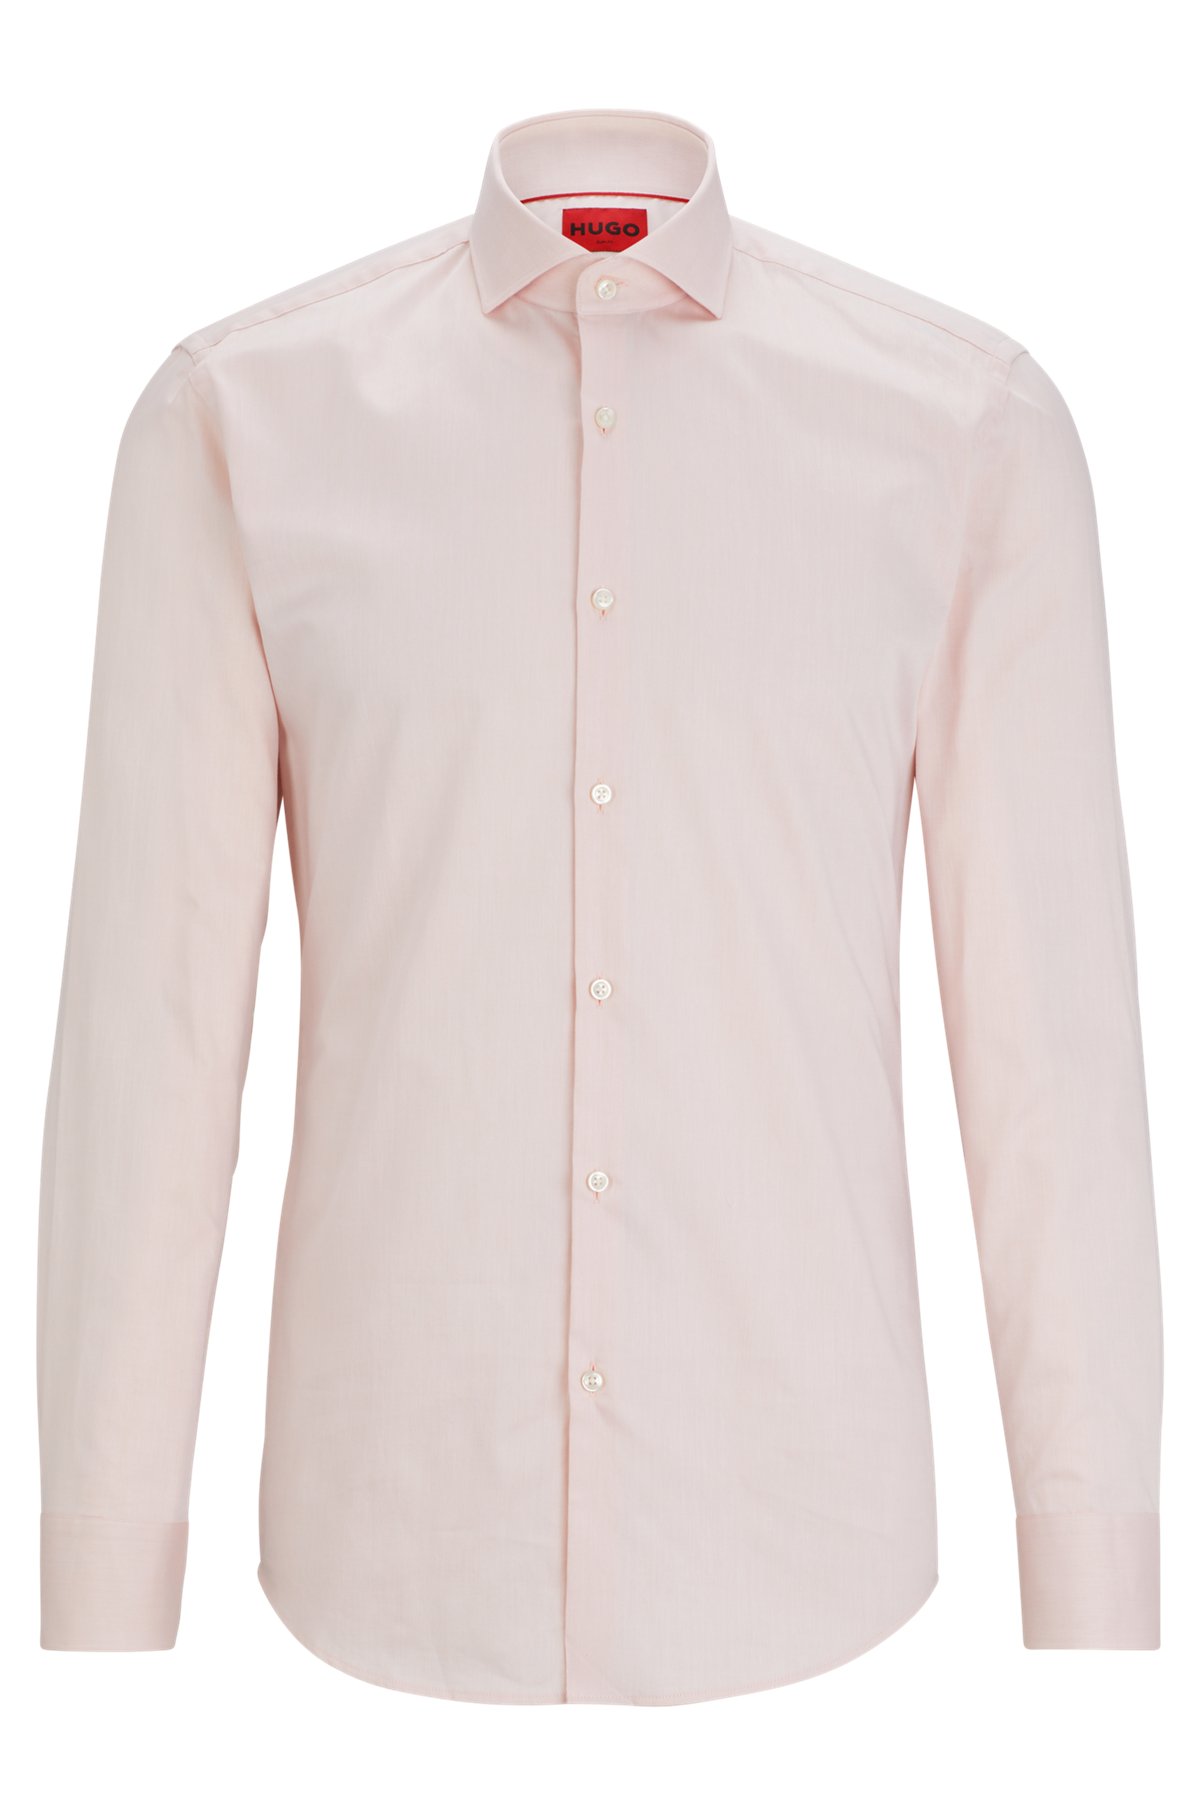 Slim-fit shirt in easy-iron cotton twill, light pink